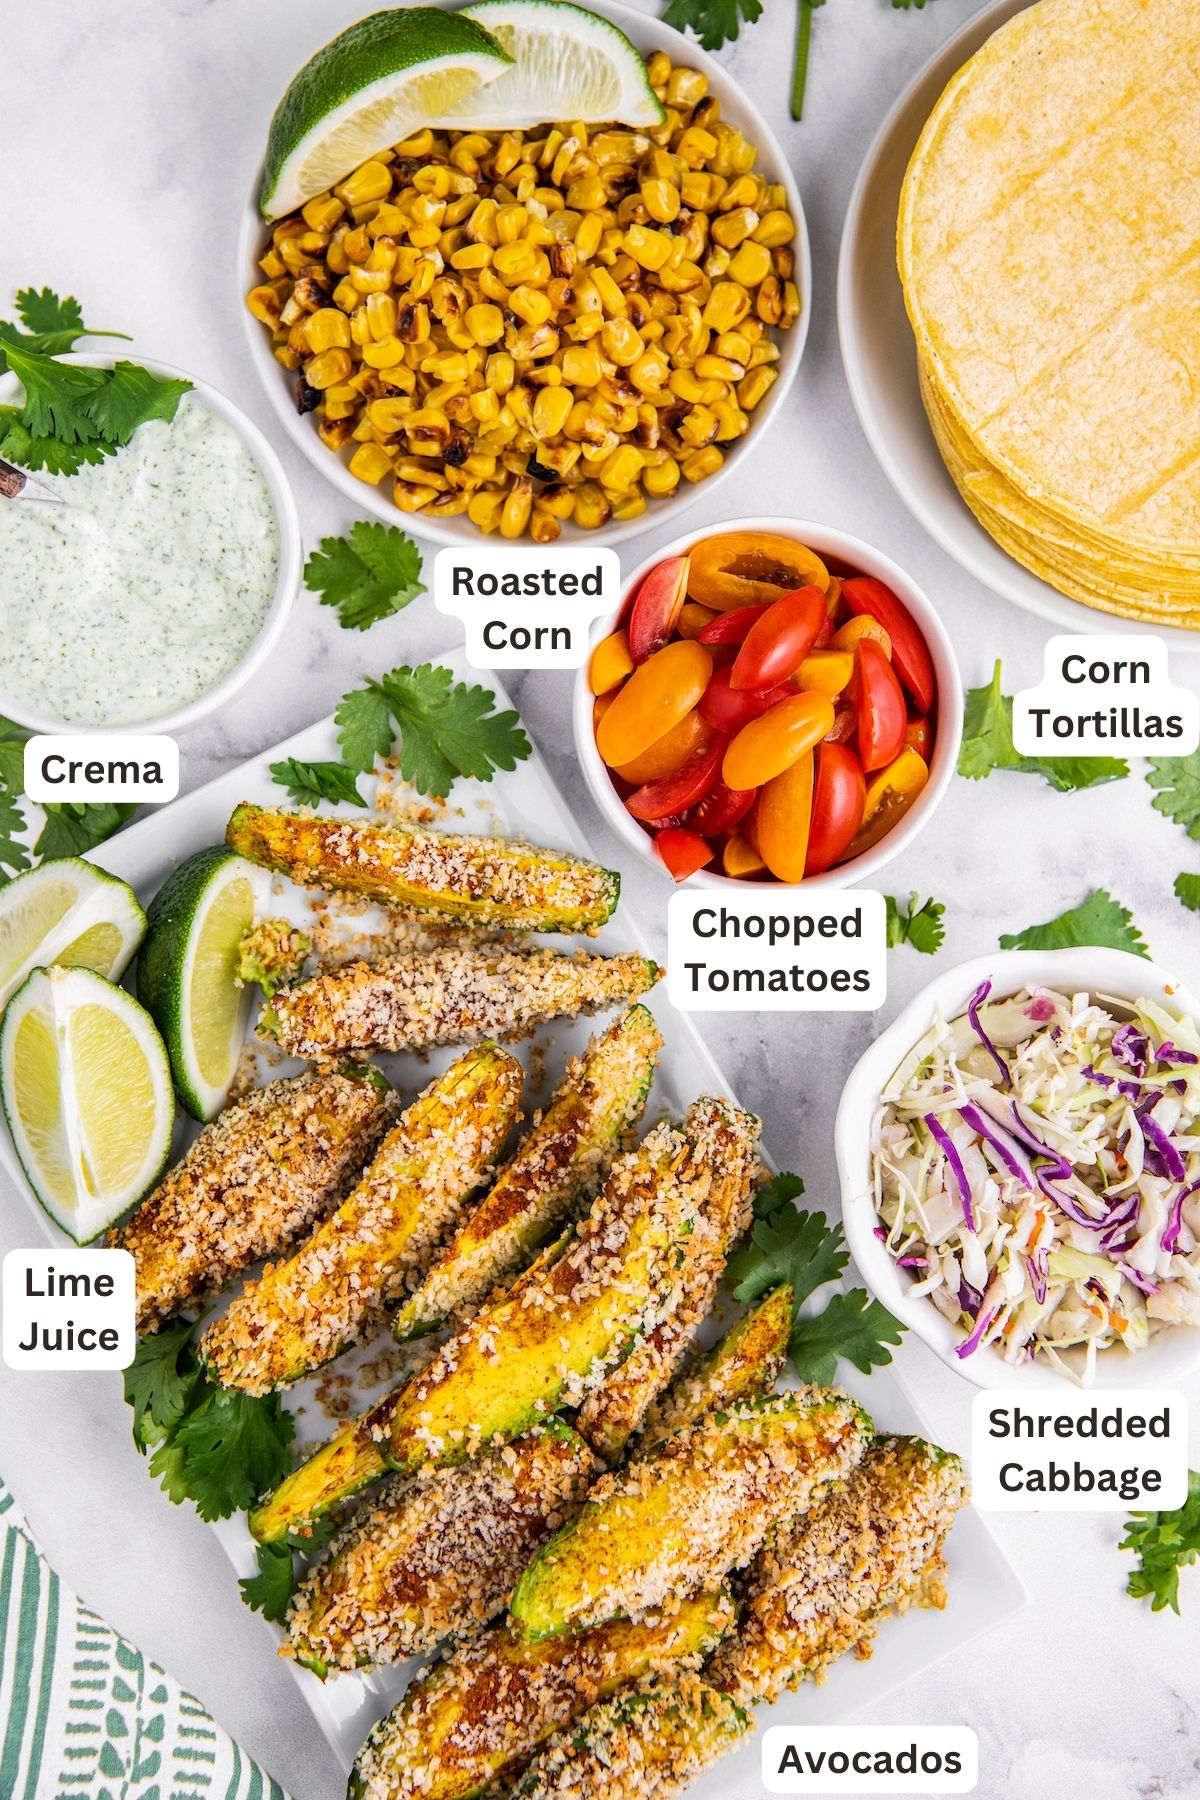 Ingredients to make Air Fried Avocado Tacos.